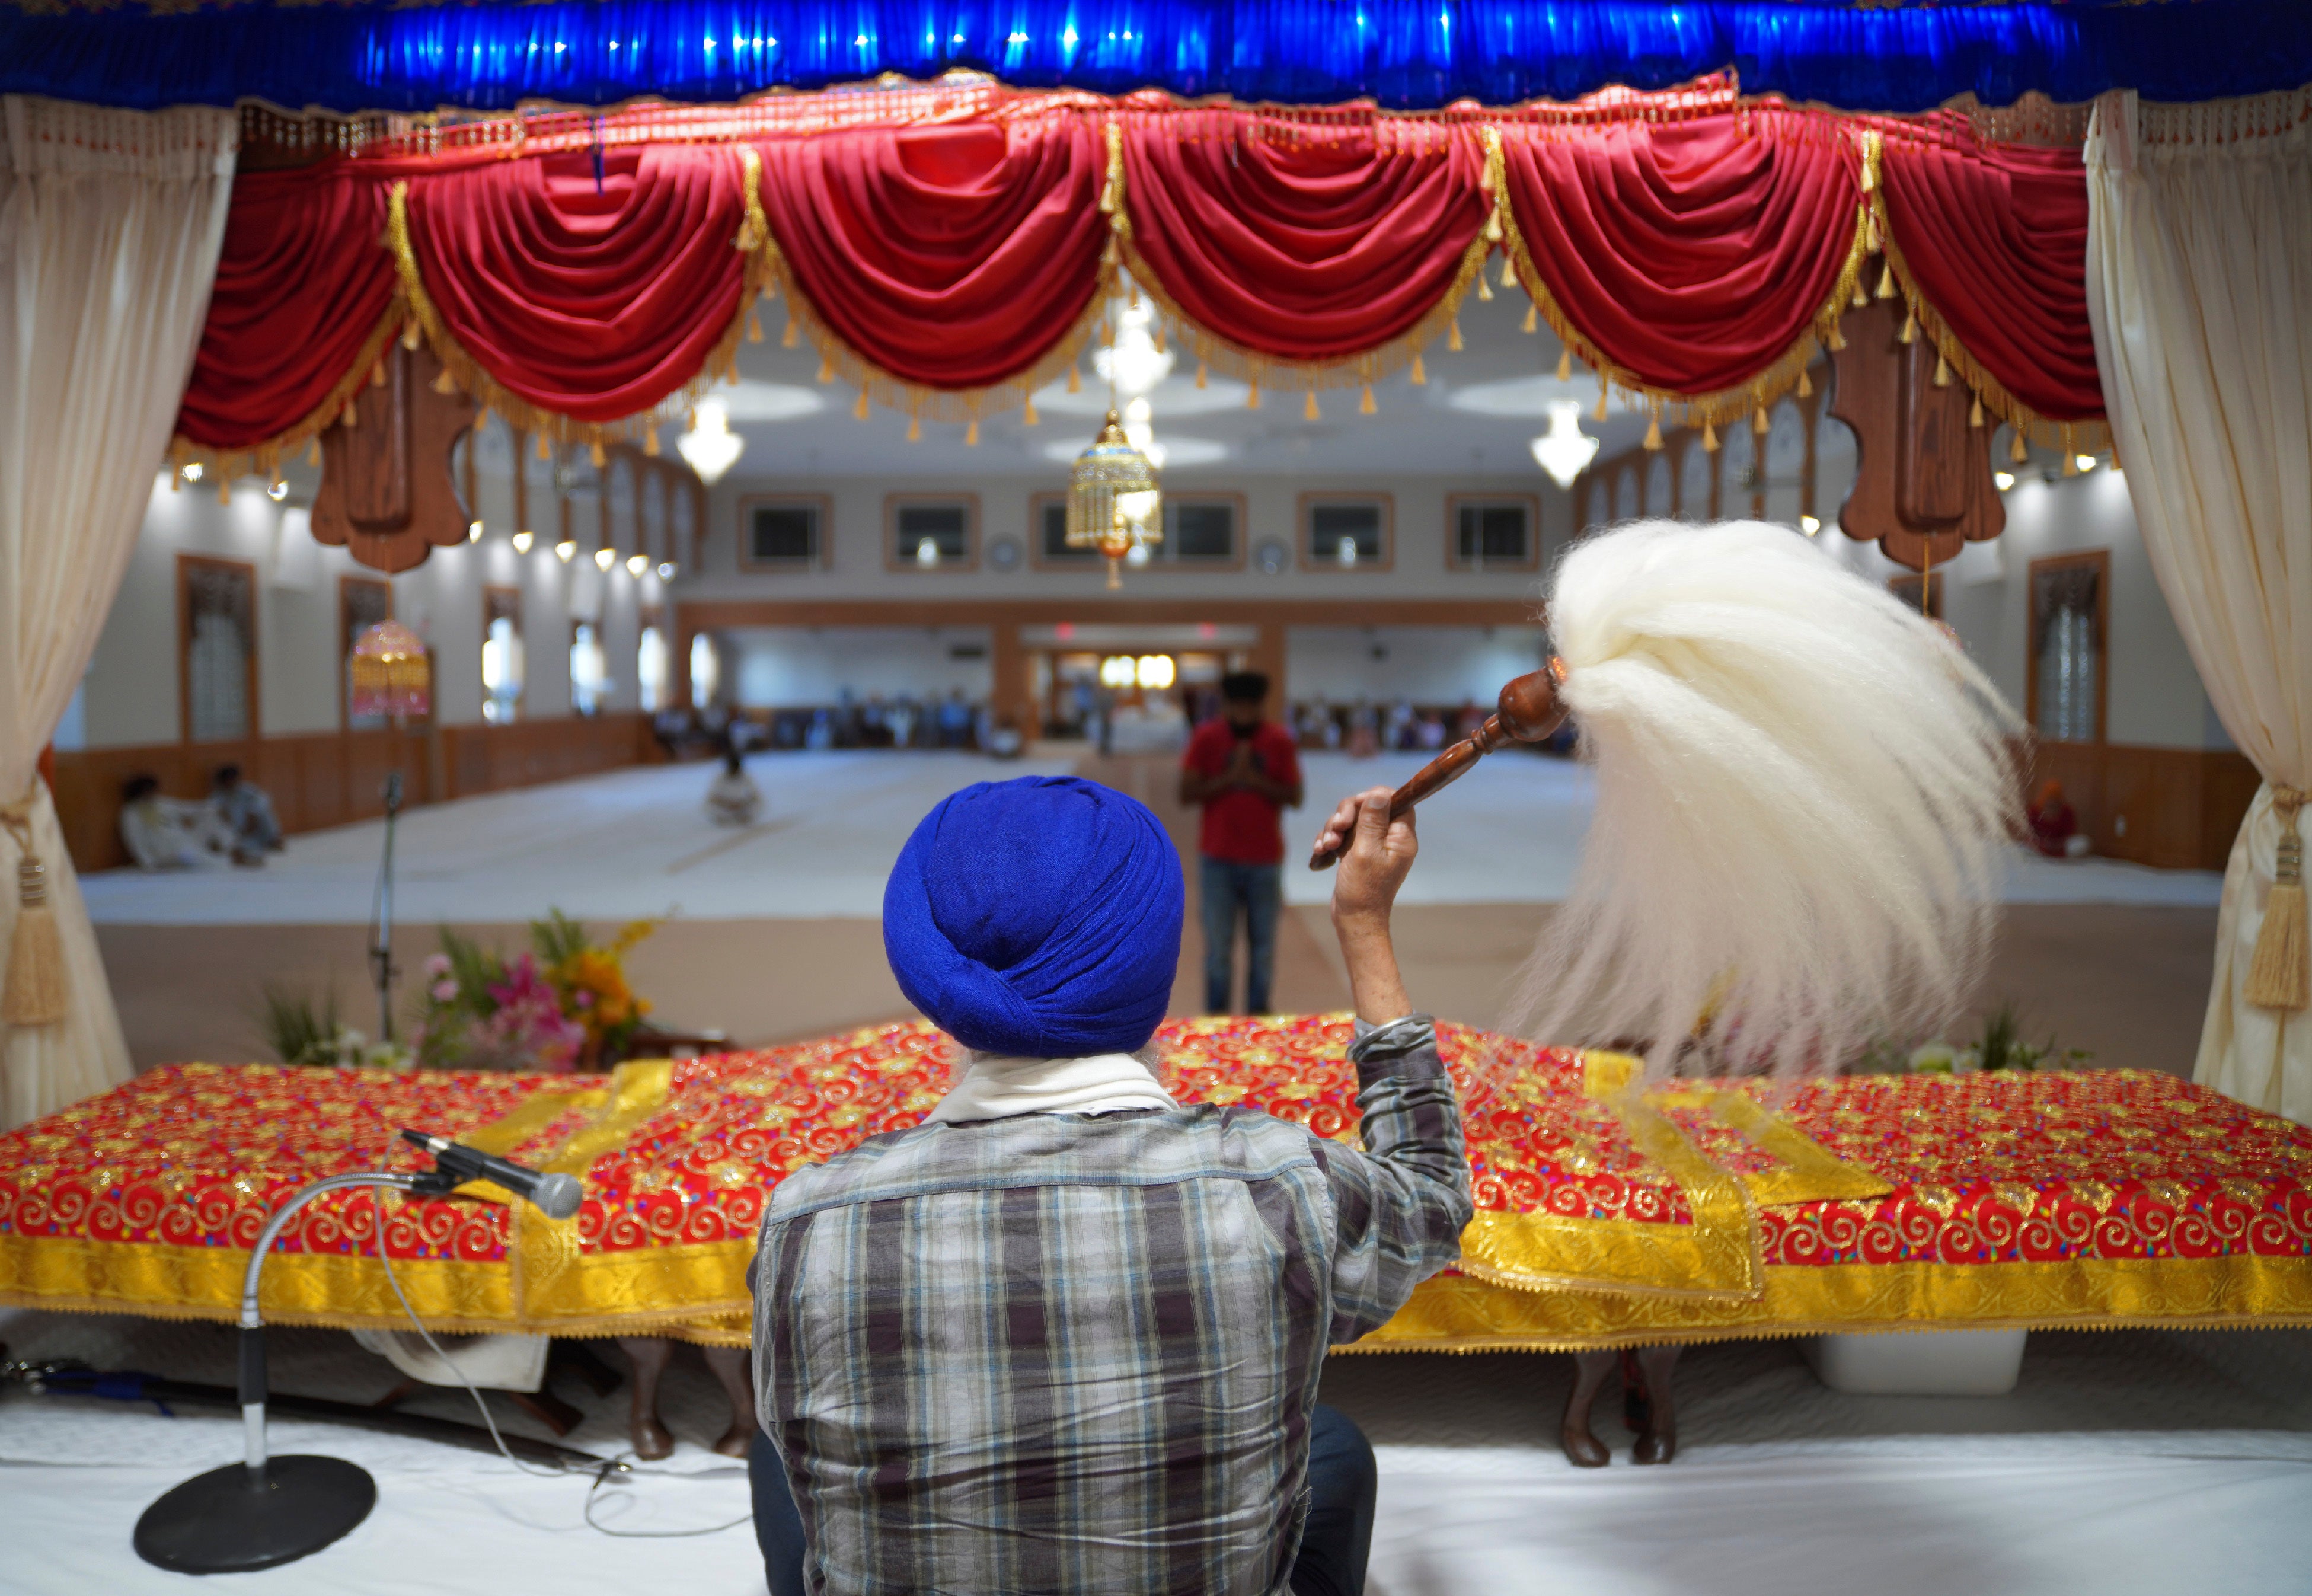 Representational photo: A man waves the Chaur Sahib, paying respect to the sacred scripture, during evening prayer at Gurdwara Millwoods, a Sikh house of worship, in Edmonton, Alberta, Canada on 20 July 2022